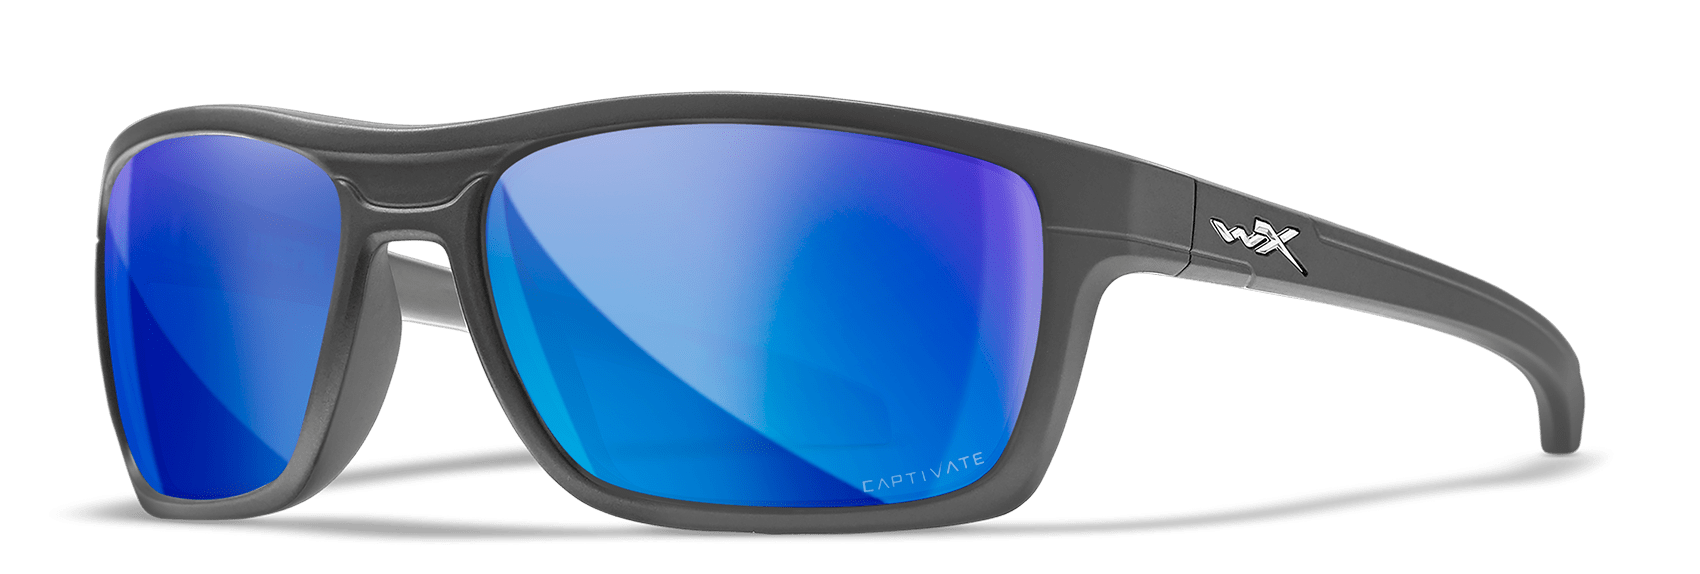 Wiley X Kingpin Sunglasses with Matte Graphite Frame and Polarized Blue Mirror Lens Front